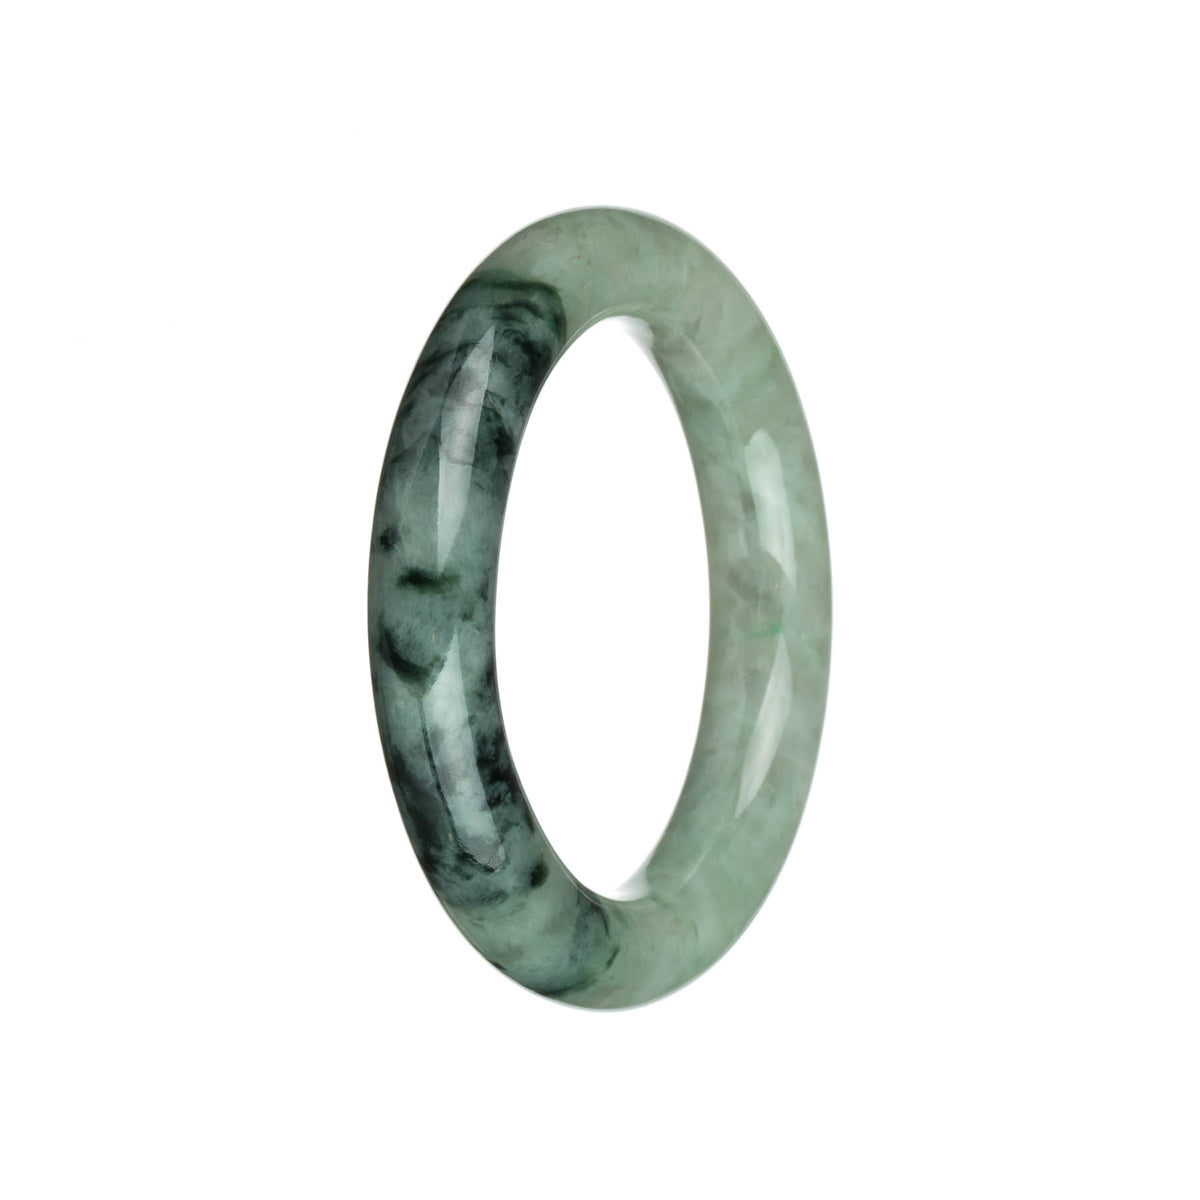 Real Grade A Light Green with Dark Green Patterns and Apple Green Patterns Burmese Jade Bangle - 55mm Round